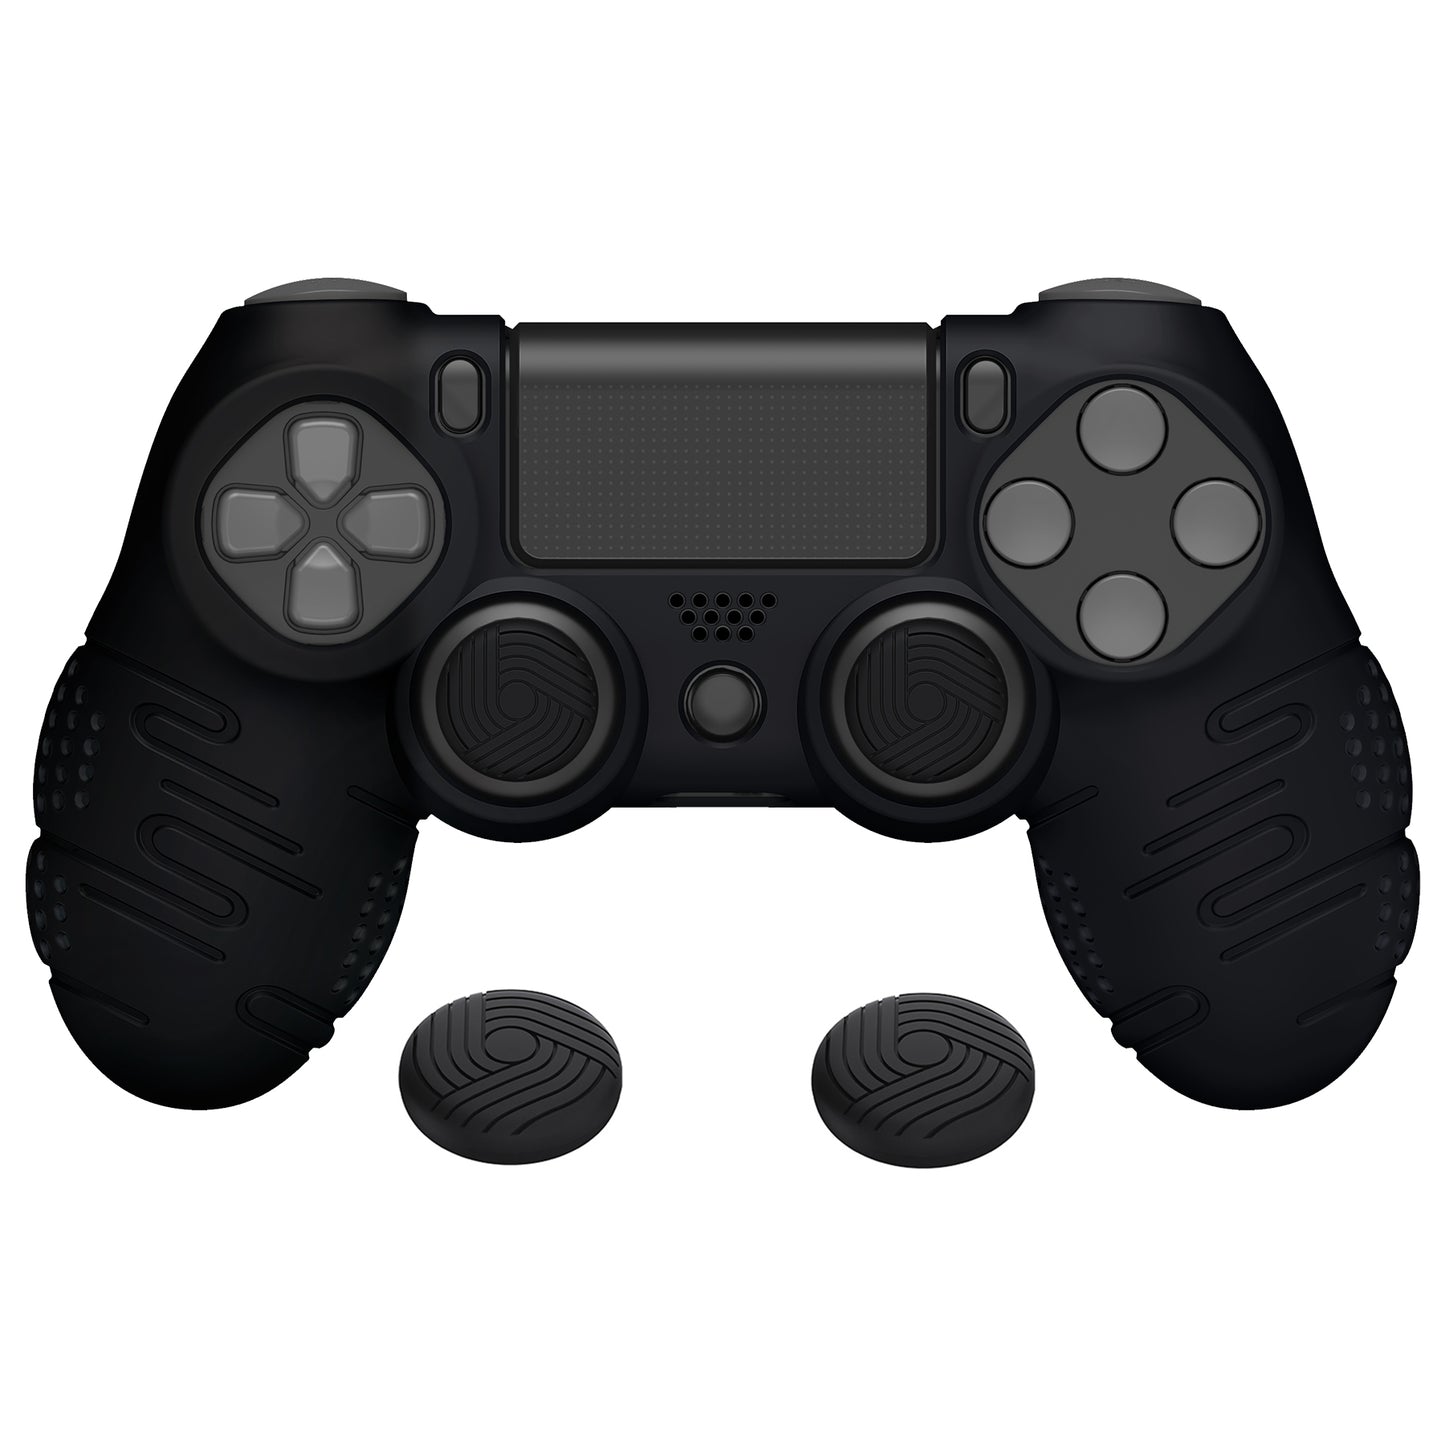 PlayVital Line & Dot Black Silicone Cover Skin for ps4 Controller, Anti-Slip Soft Protector Case Cover with Thumb Grip Caps for ps4 for ps4 Slim for ps4 Pro Controller - CLRP4P001